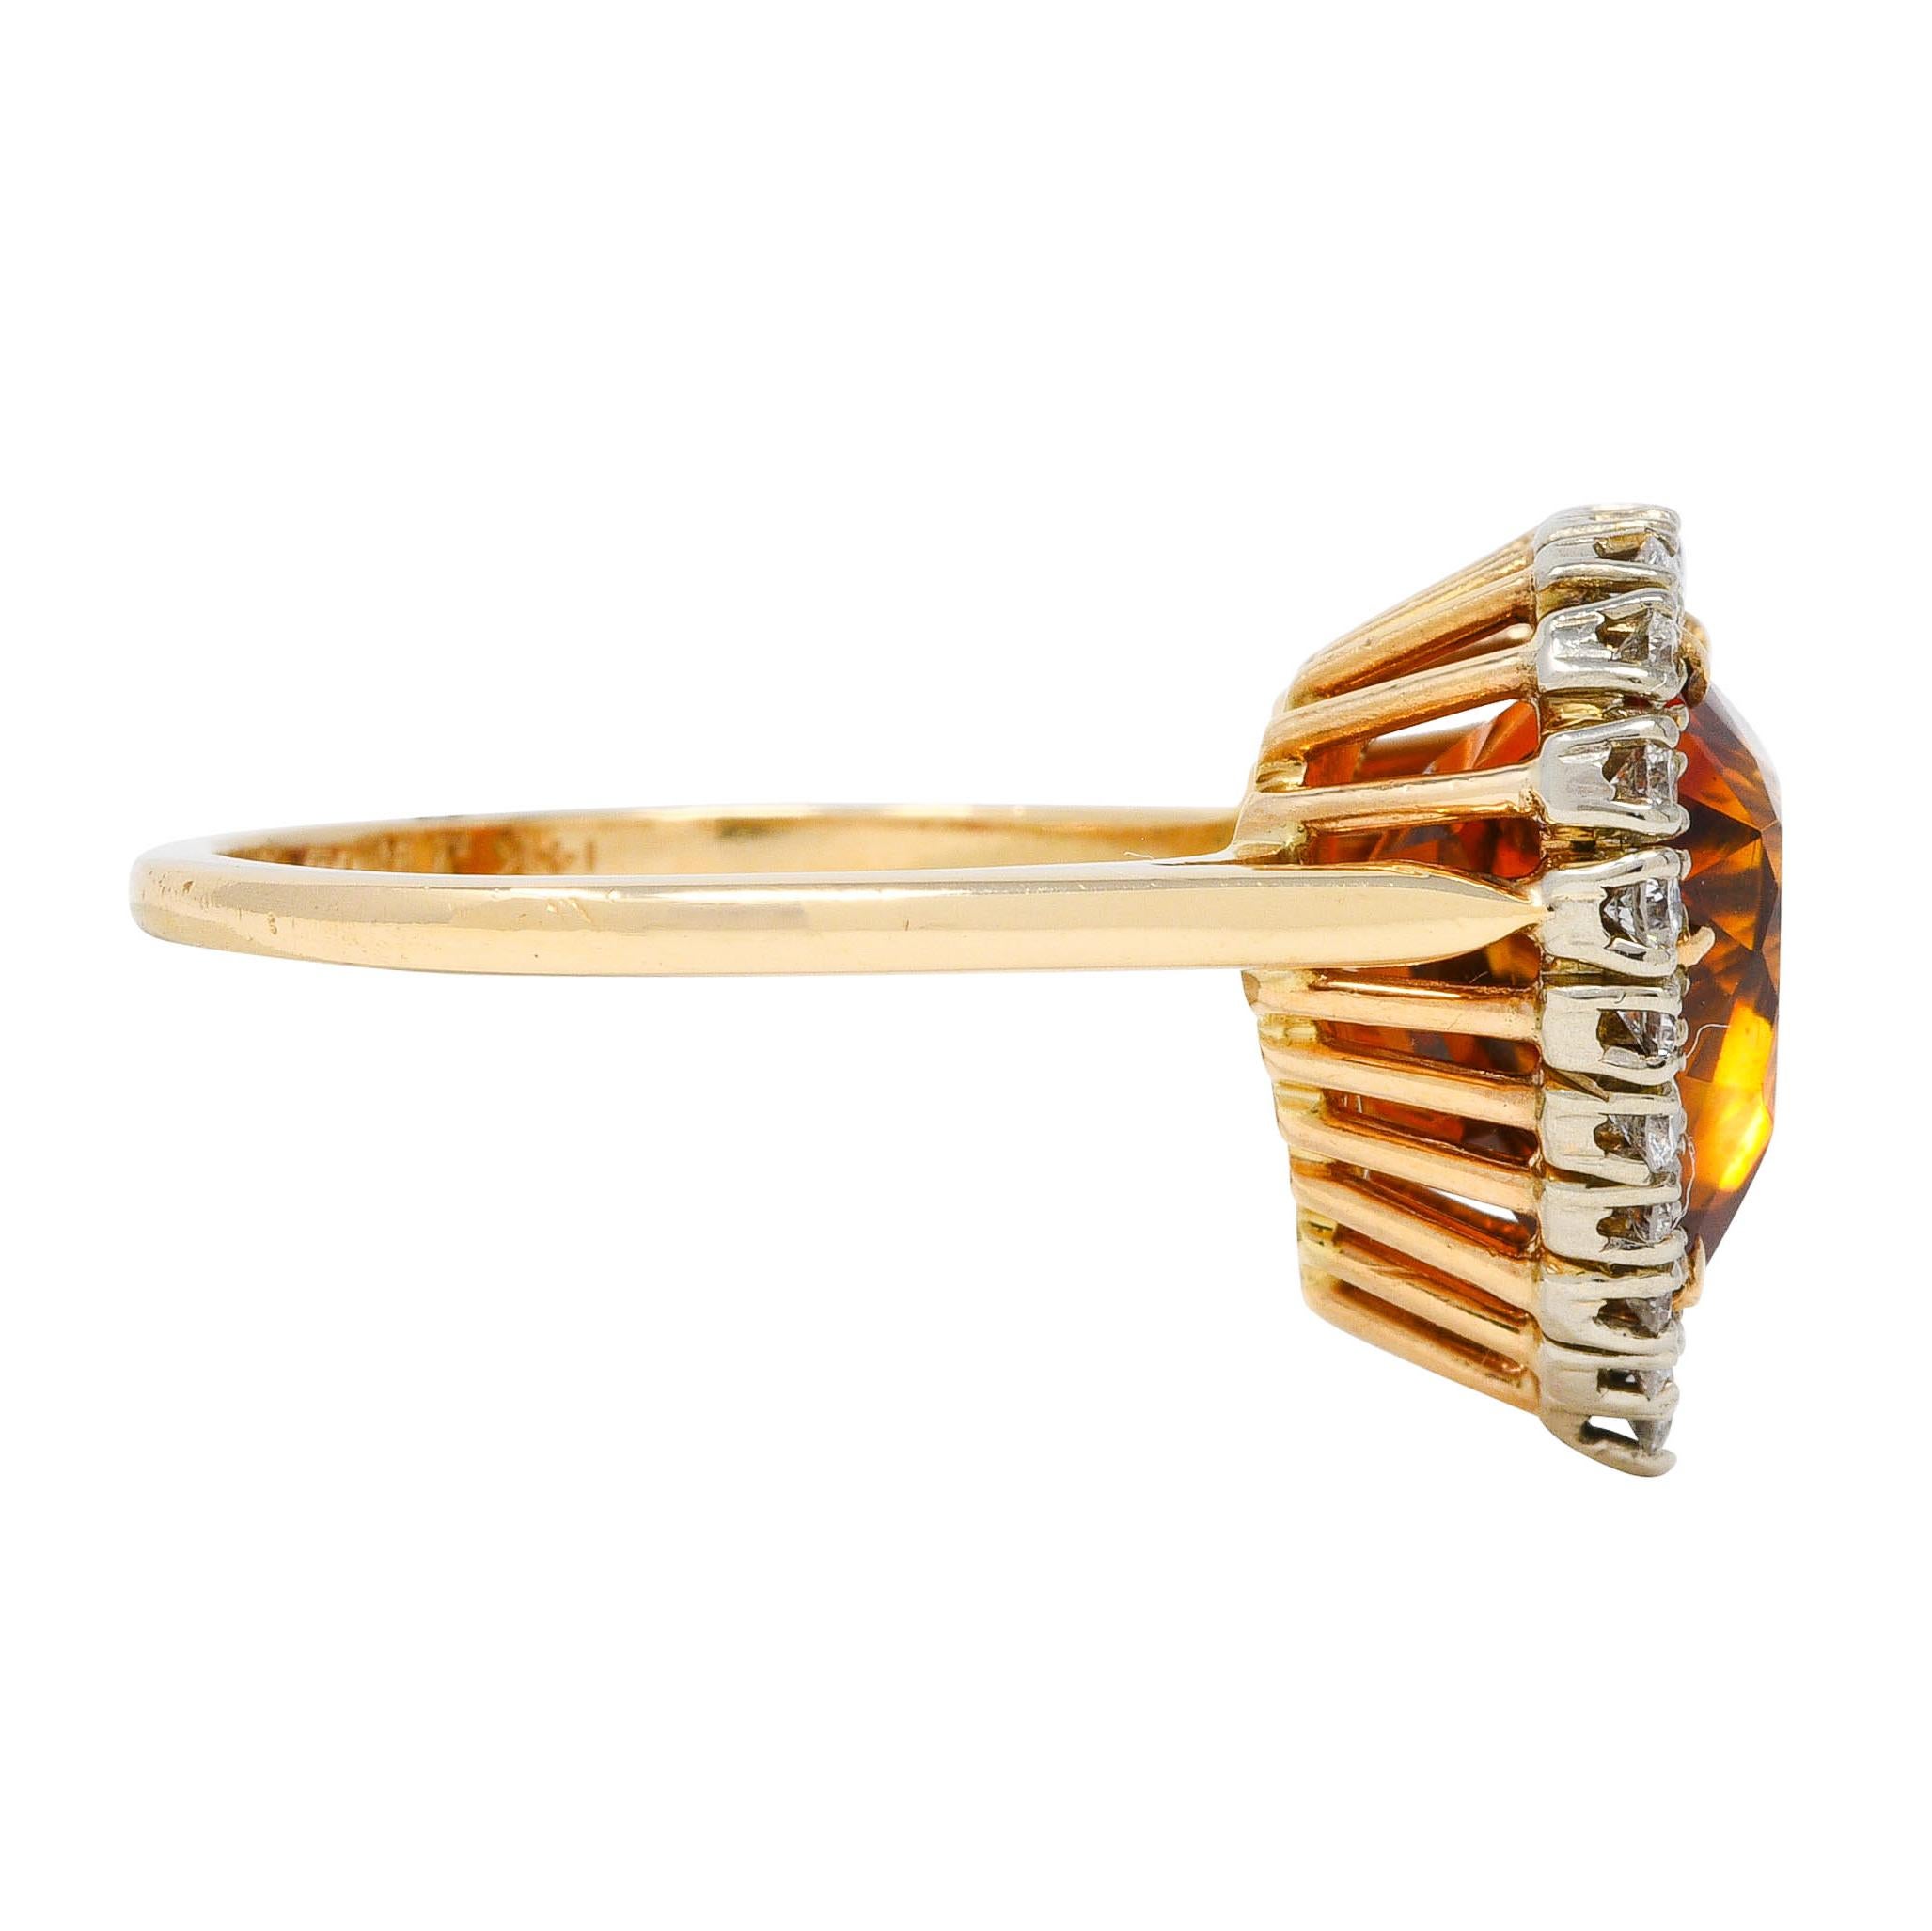 Cluster style ring designed as a heart shape centering a prong set 12.0 x 12.0 mm citrine
Citrine is medium in saturation brownish-orange in color
Surrounded by white gold prong set diamond halo, totaling approximately 0.50 carat 
Diamonds are G/H